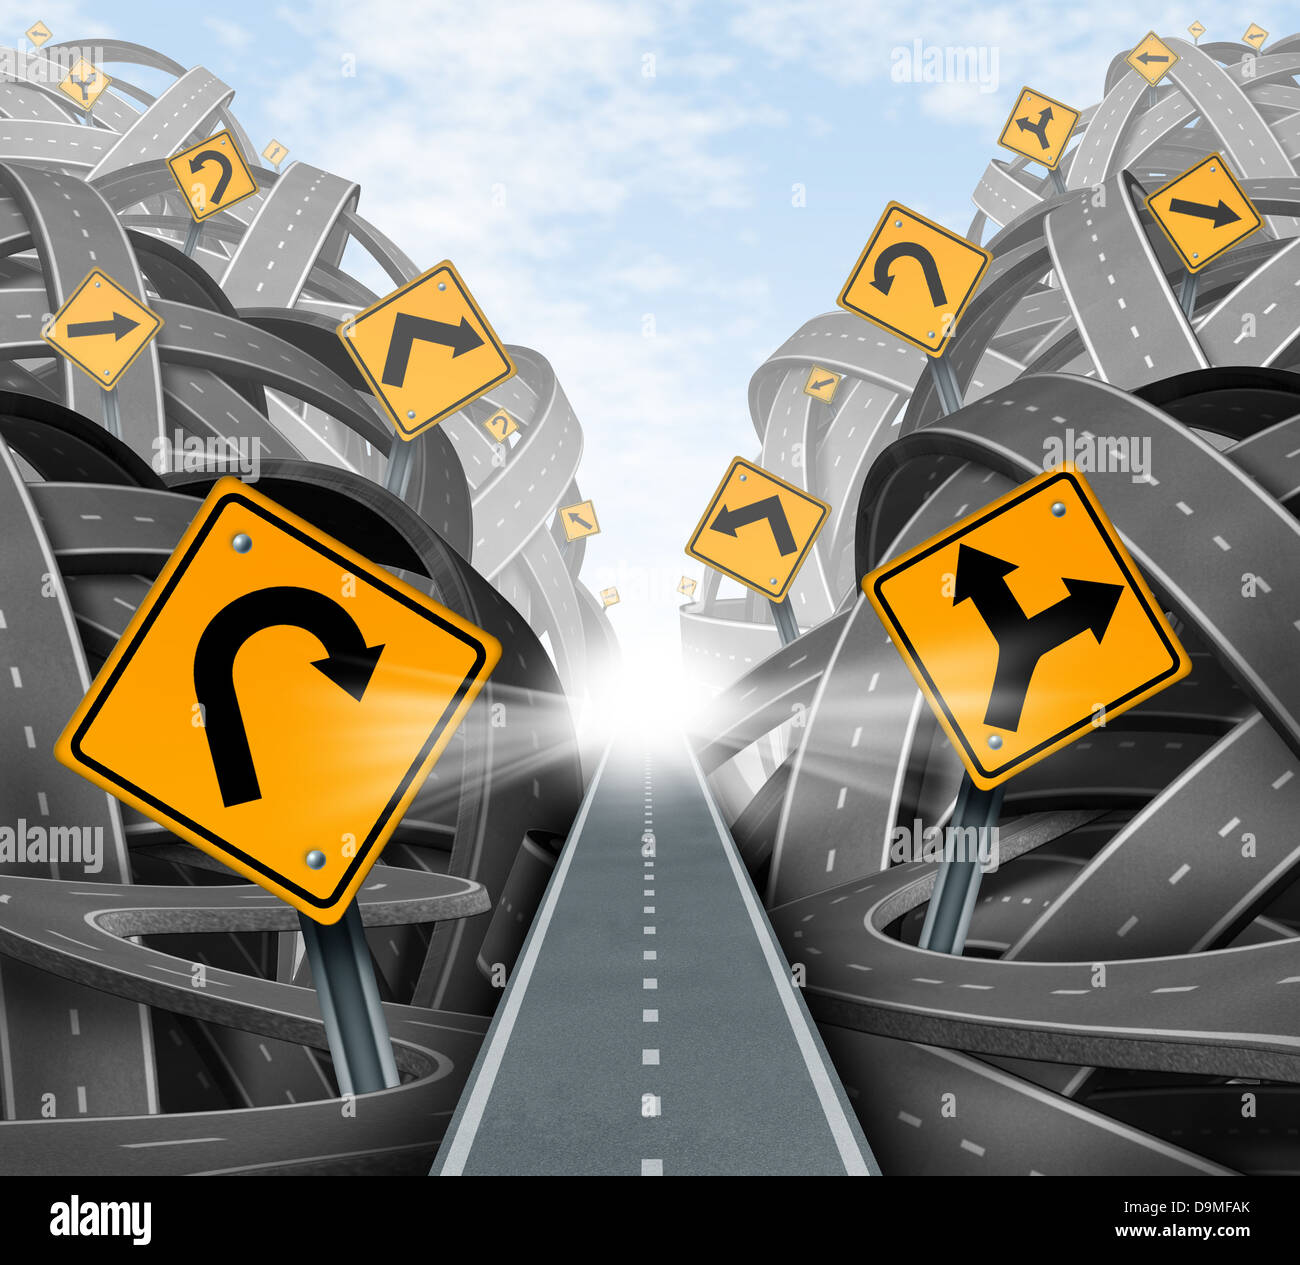 Clear strategic solution for business leadership with a straight path to success choosing the right strategy path with yellow traffic signs cutting through a maze of tangled roads and highways. Stock Photo